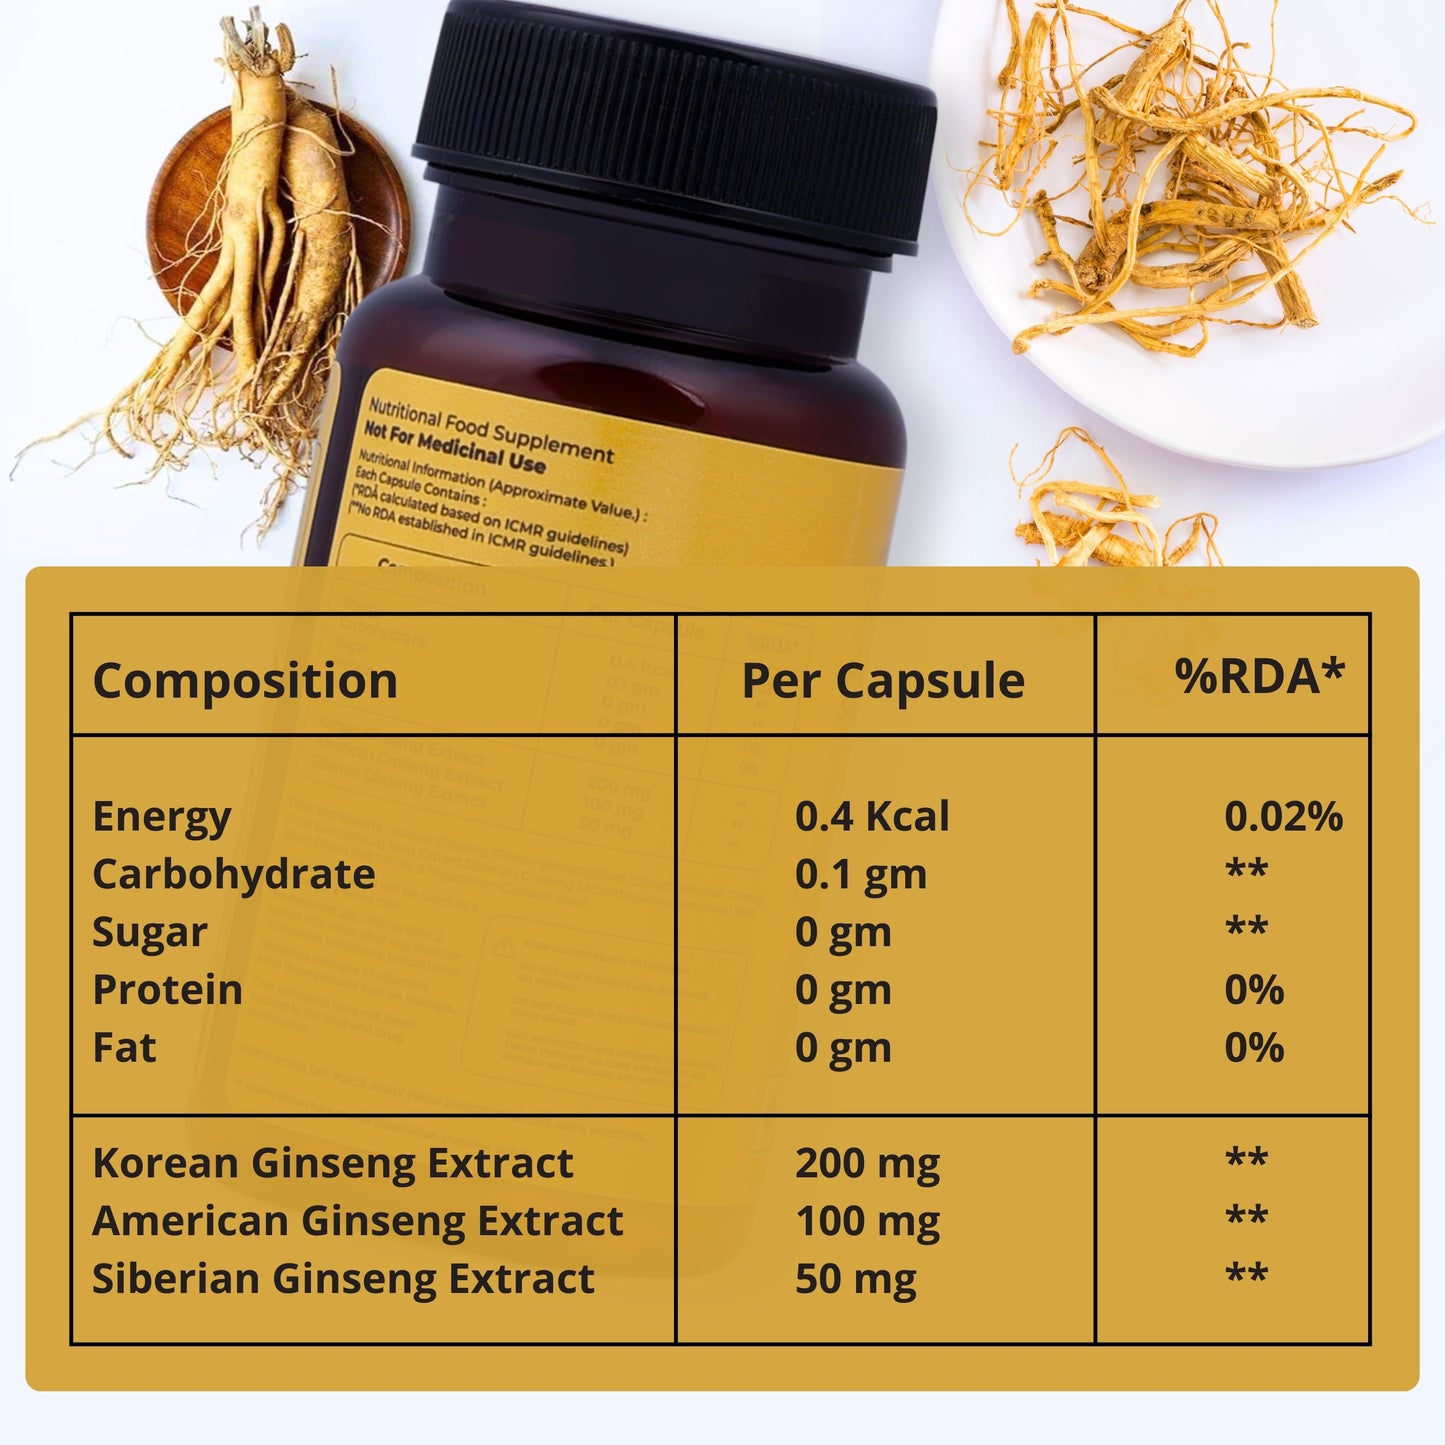 NOTSHY Triple Ginseng capsules formulation is a unique blend of Korean, American, Siberian Ginseng. 1 Bottle of 30 Veg Capsules